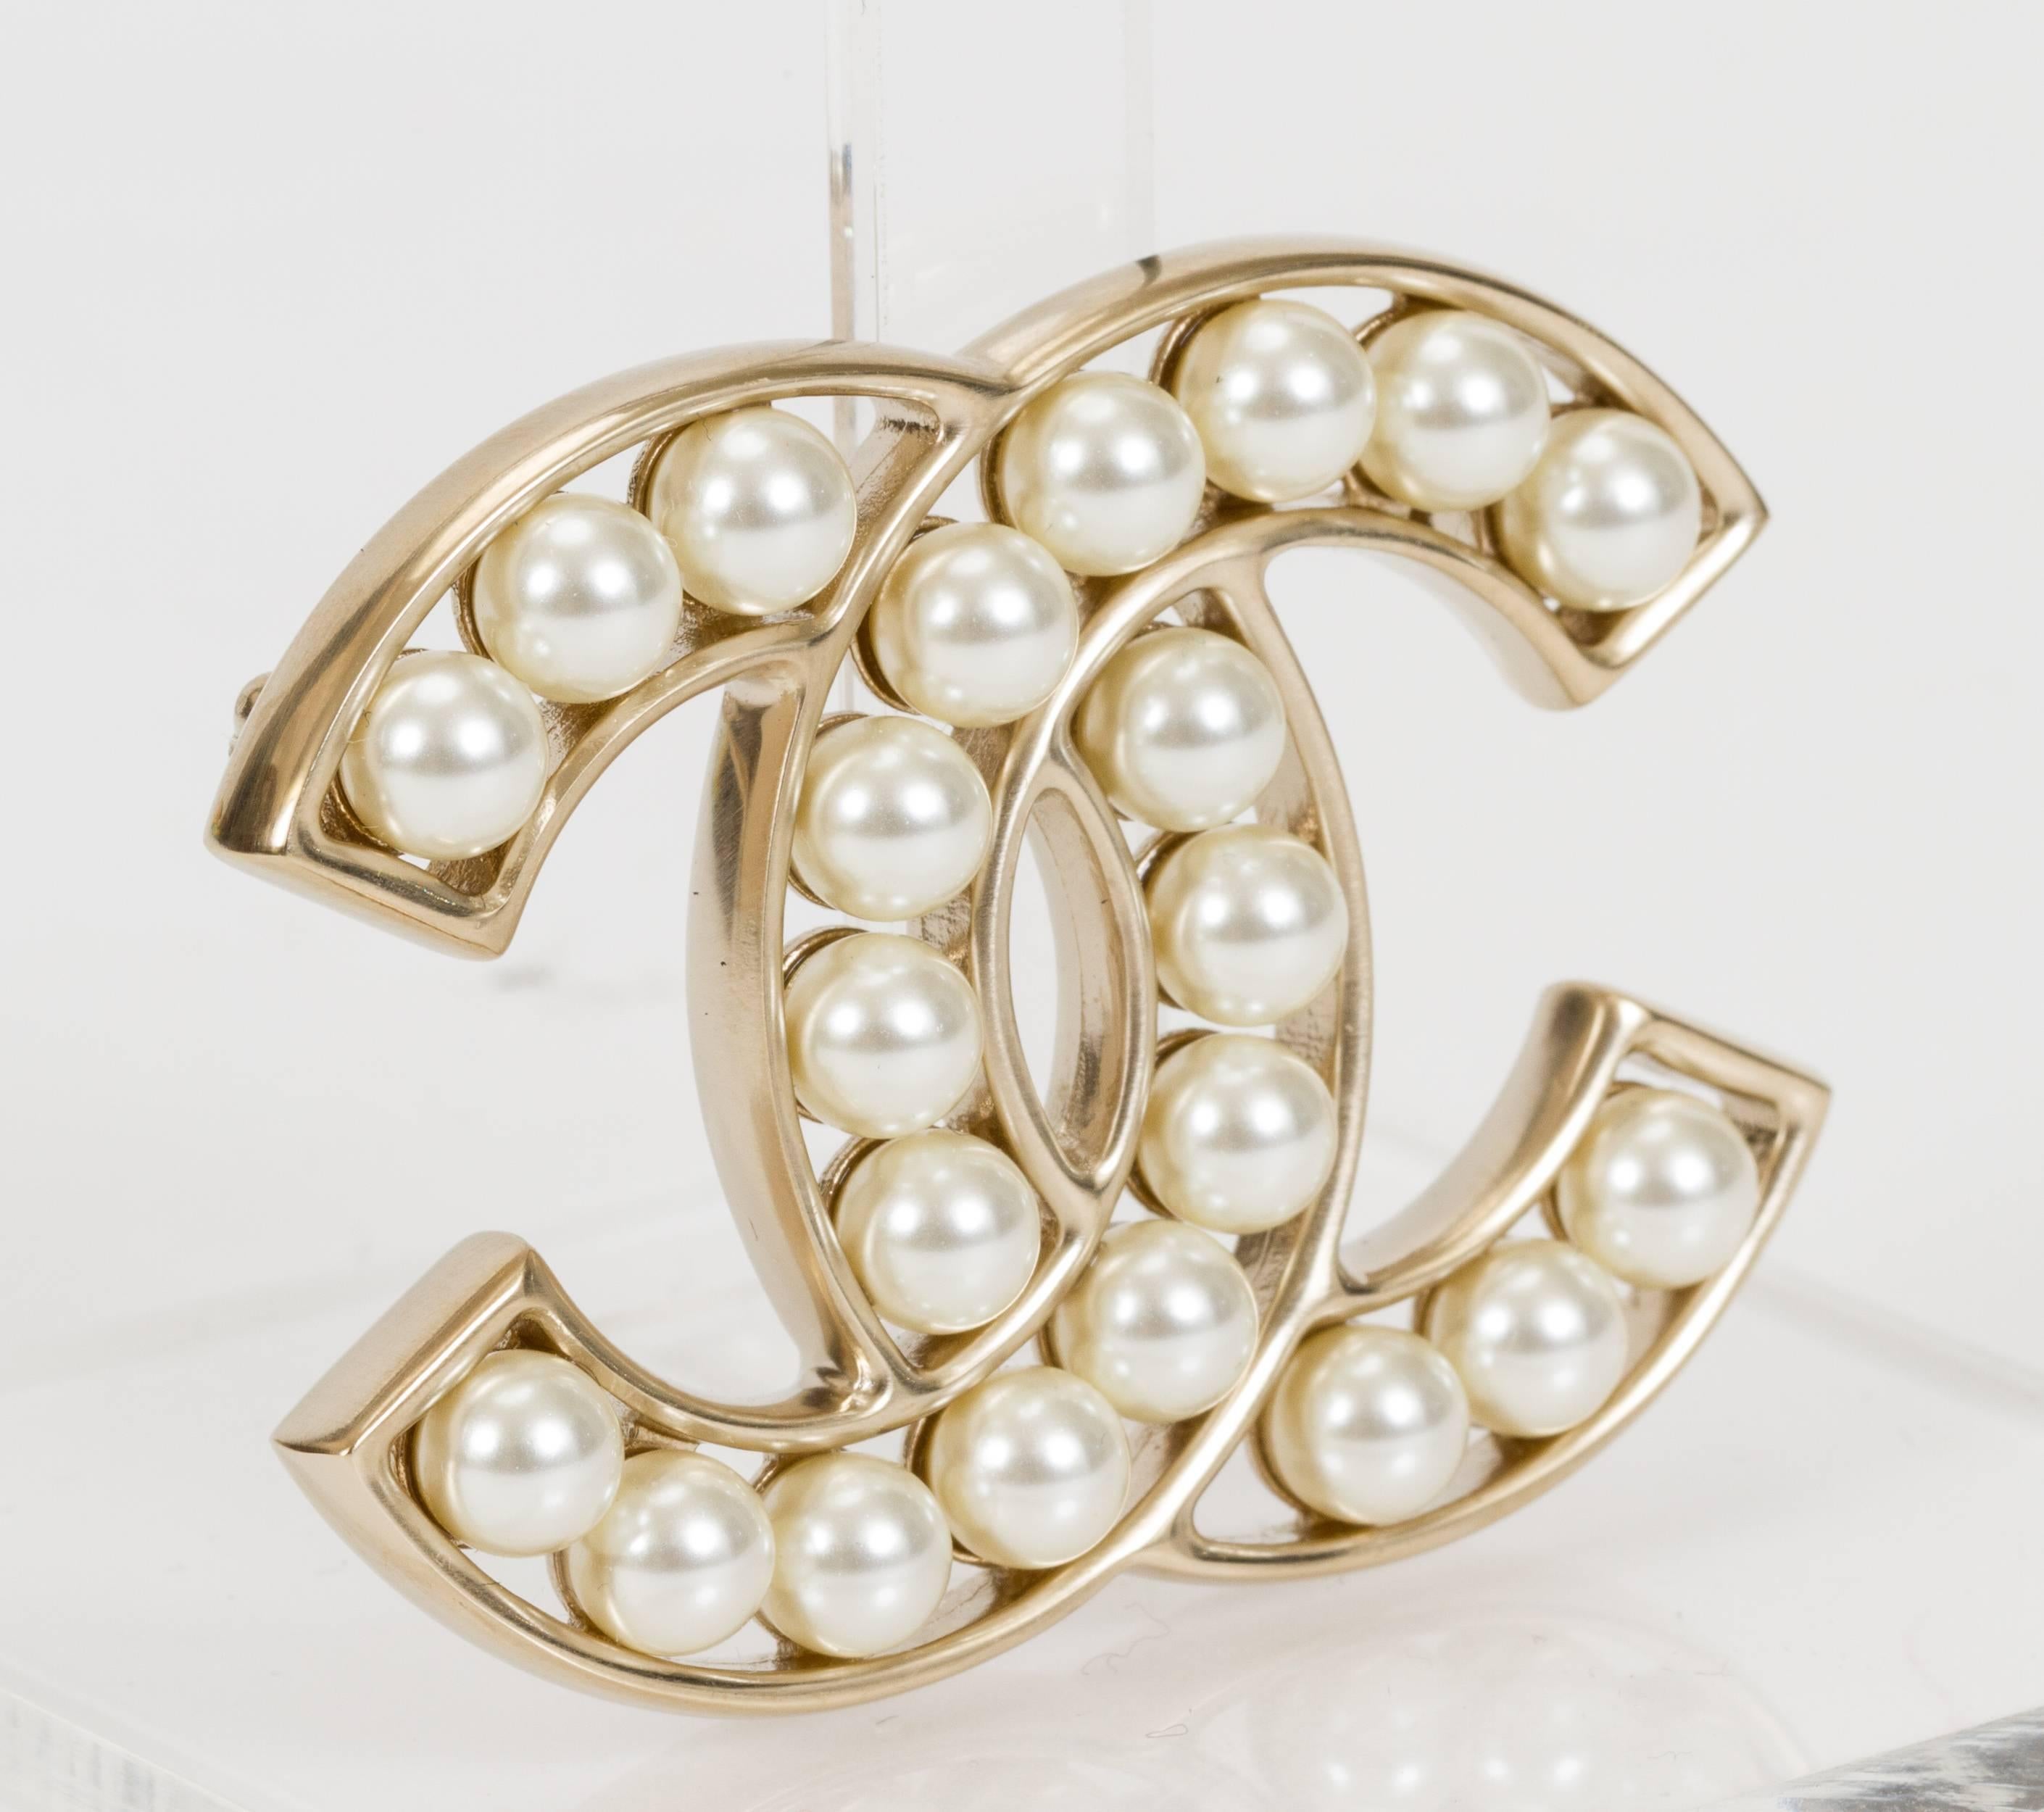 Chanel logo faux-pearl and silvertone brooch. 2015 collection. Comes with velvet pouch and box.